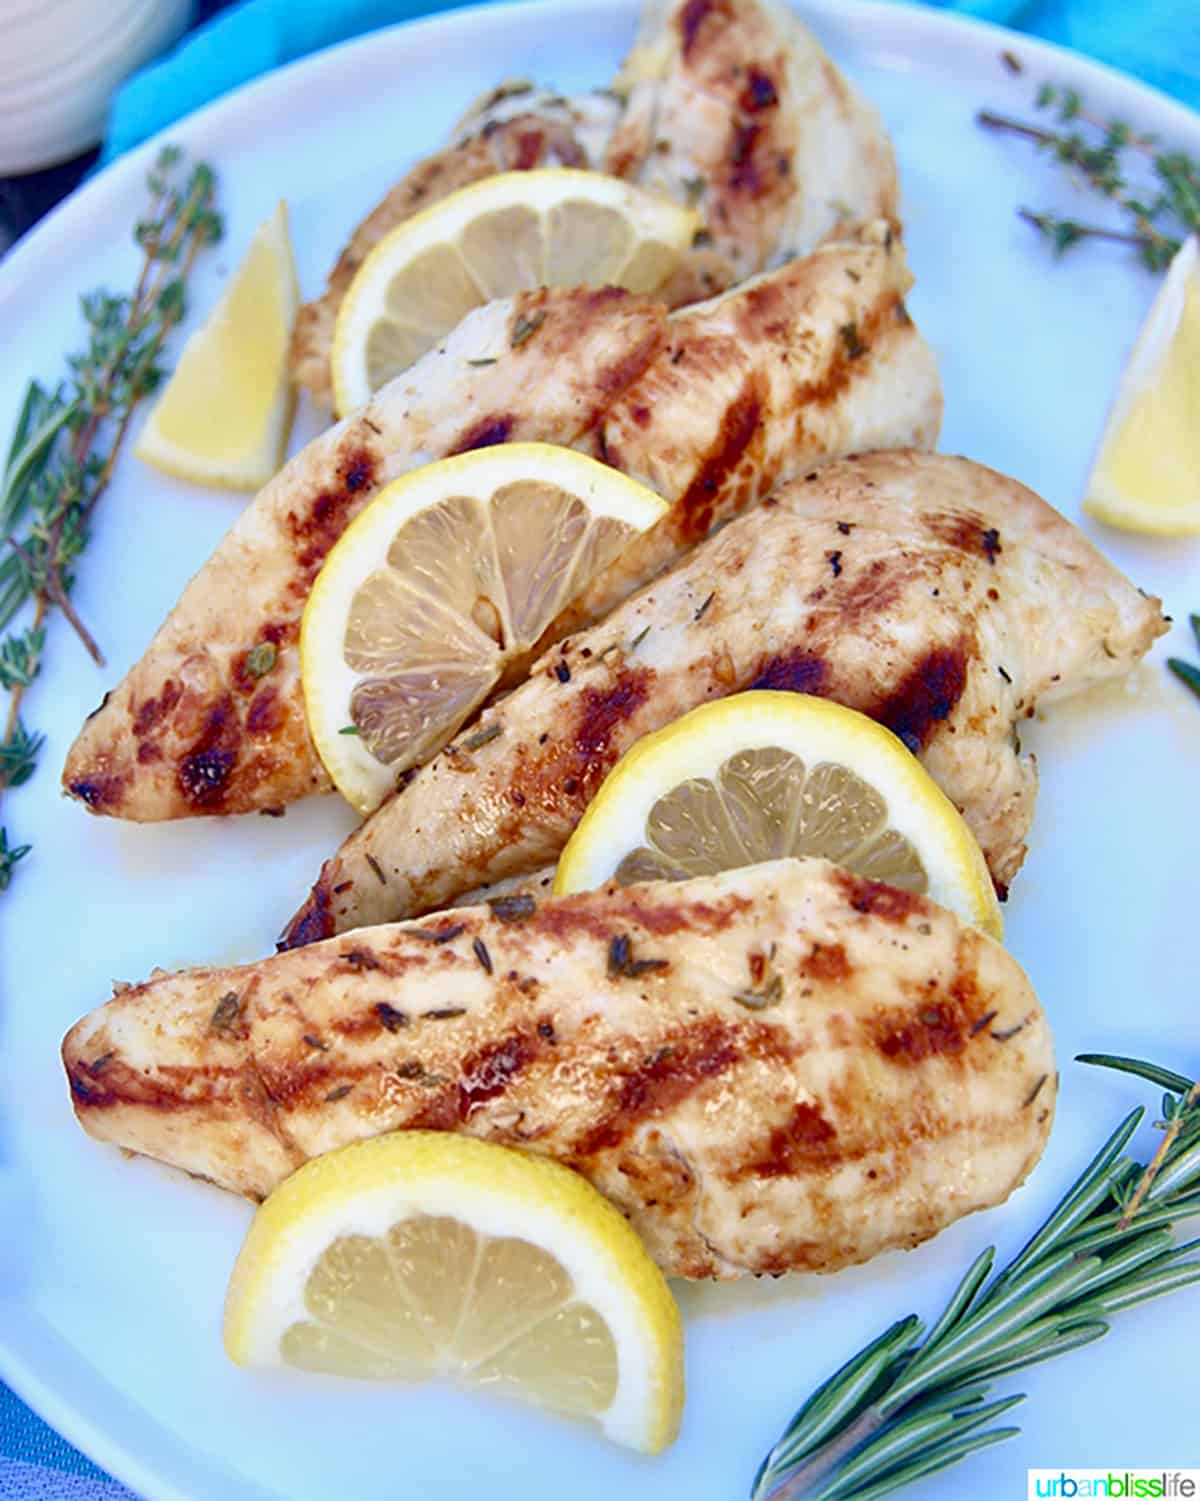 grilled lemon pepper chicken with lemon slices and herbs.